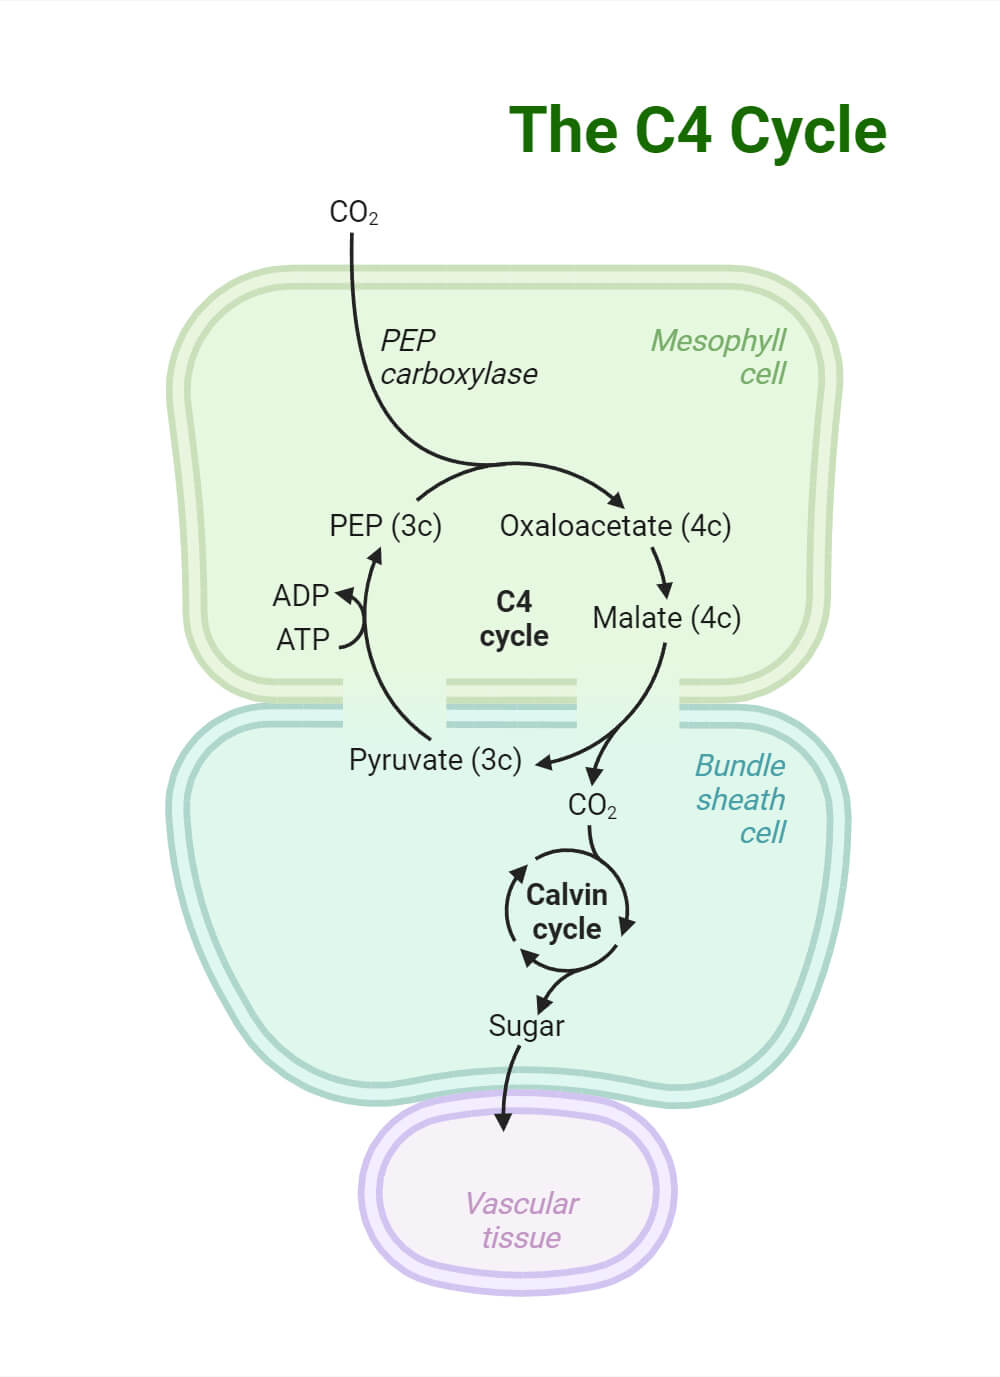 The C4 Cycle in Plants